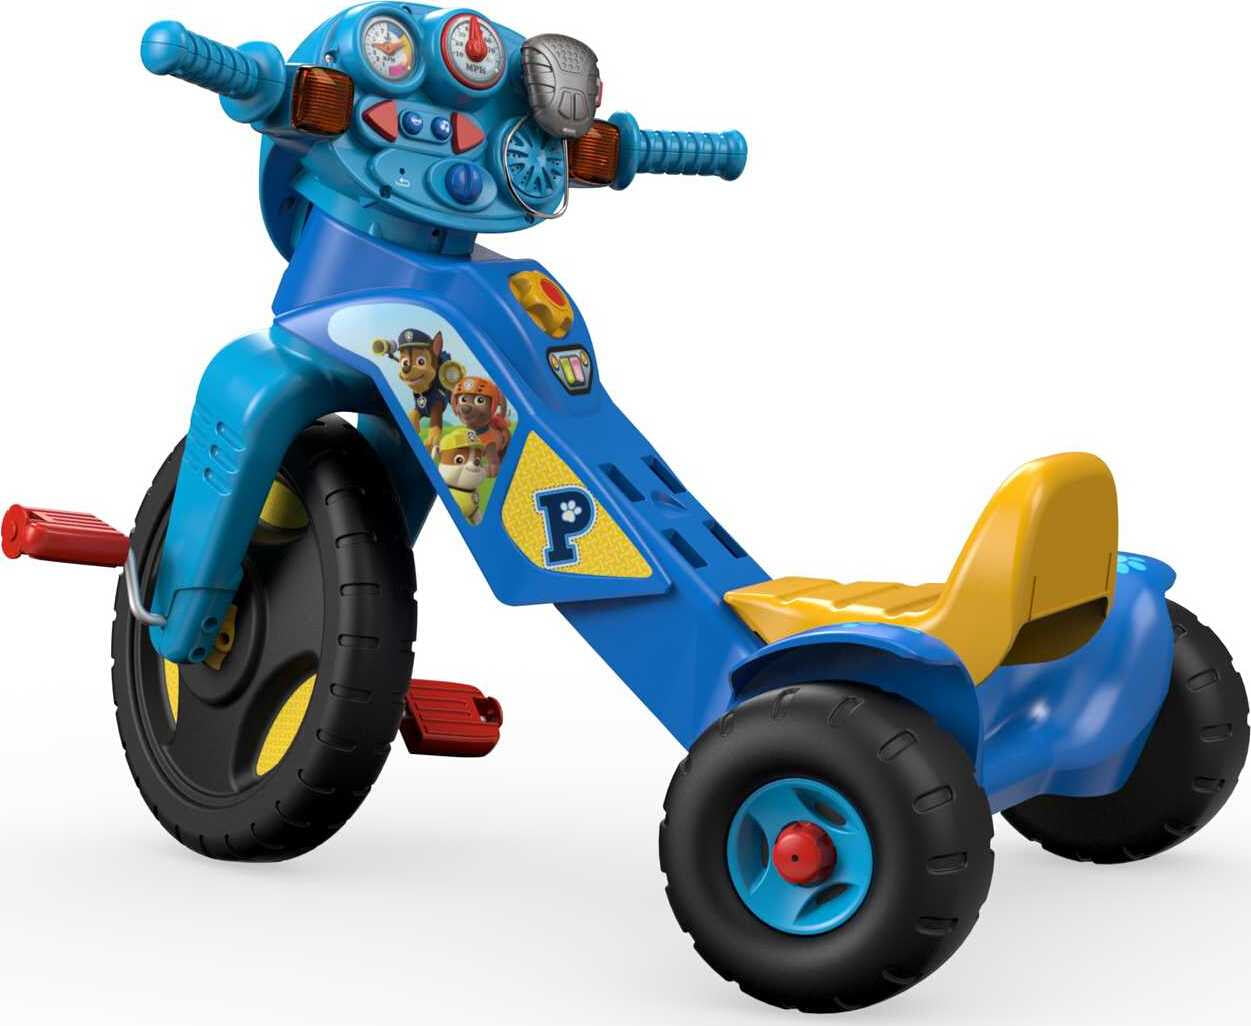 Fisher-Price Nickelodeon PAW Patrol Lights & Sounds Trike Ride-On Vehicle - 1